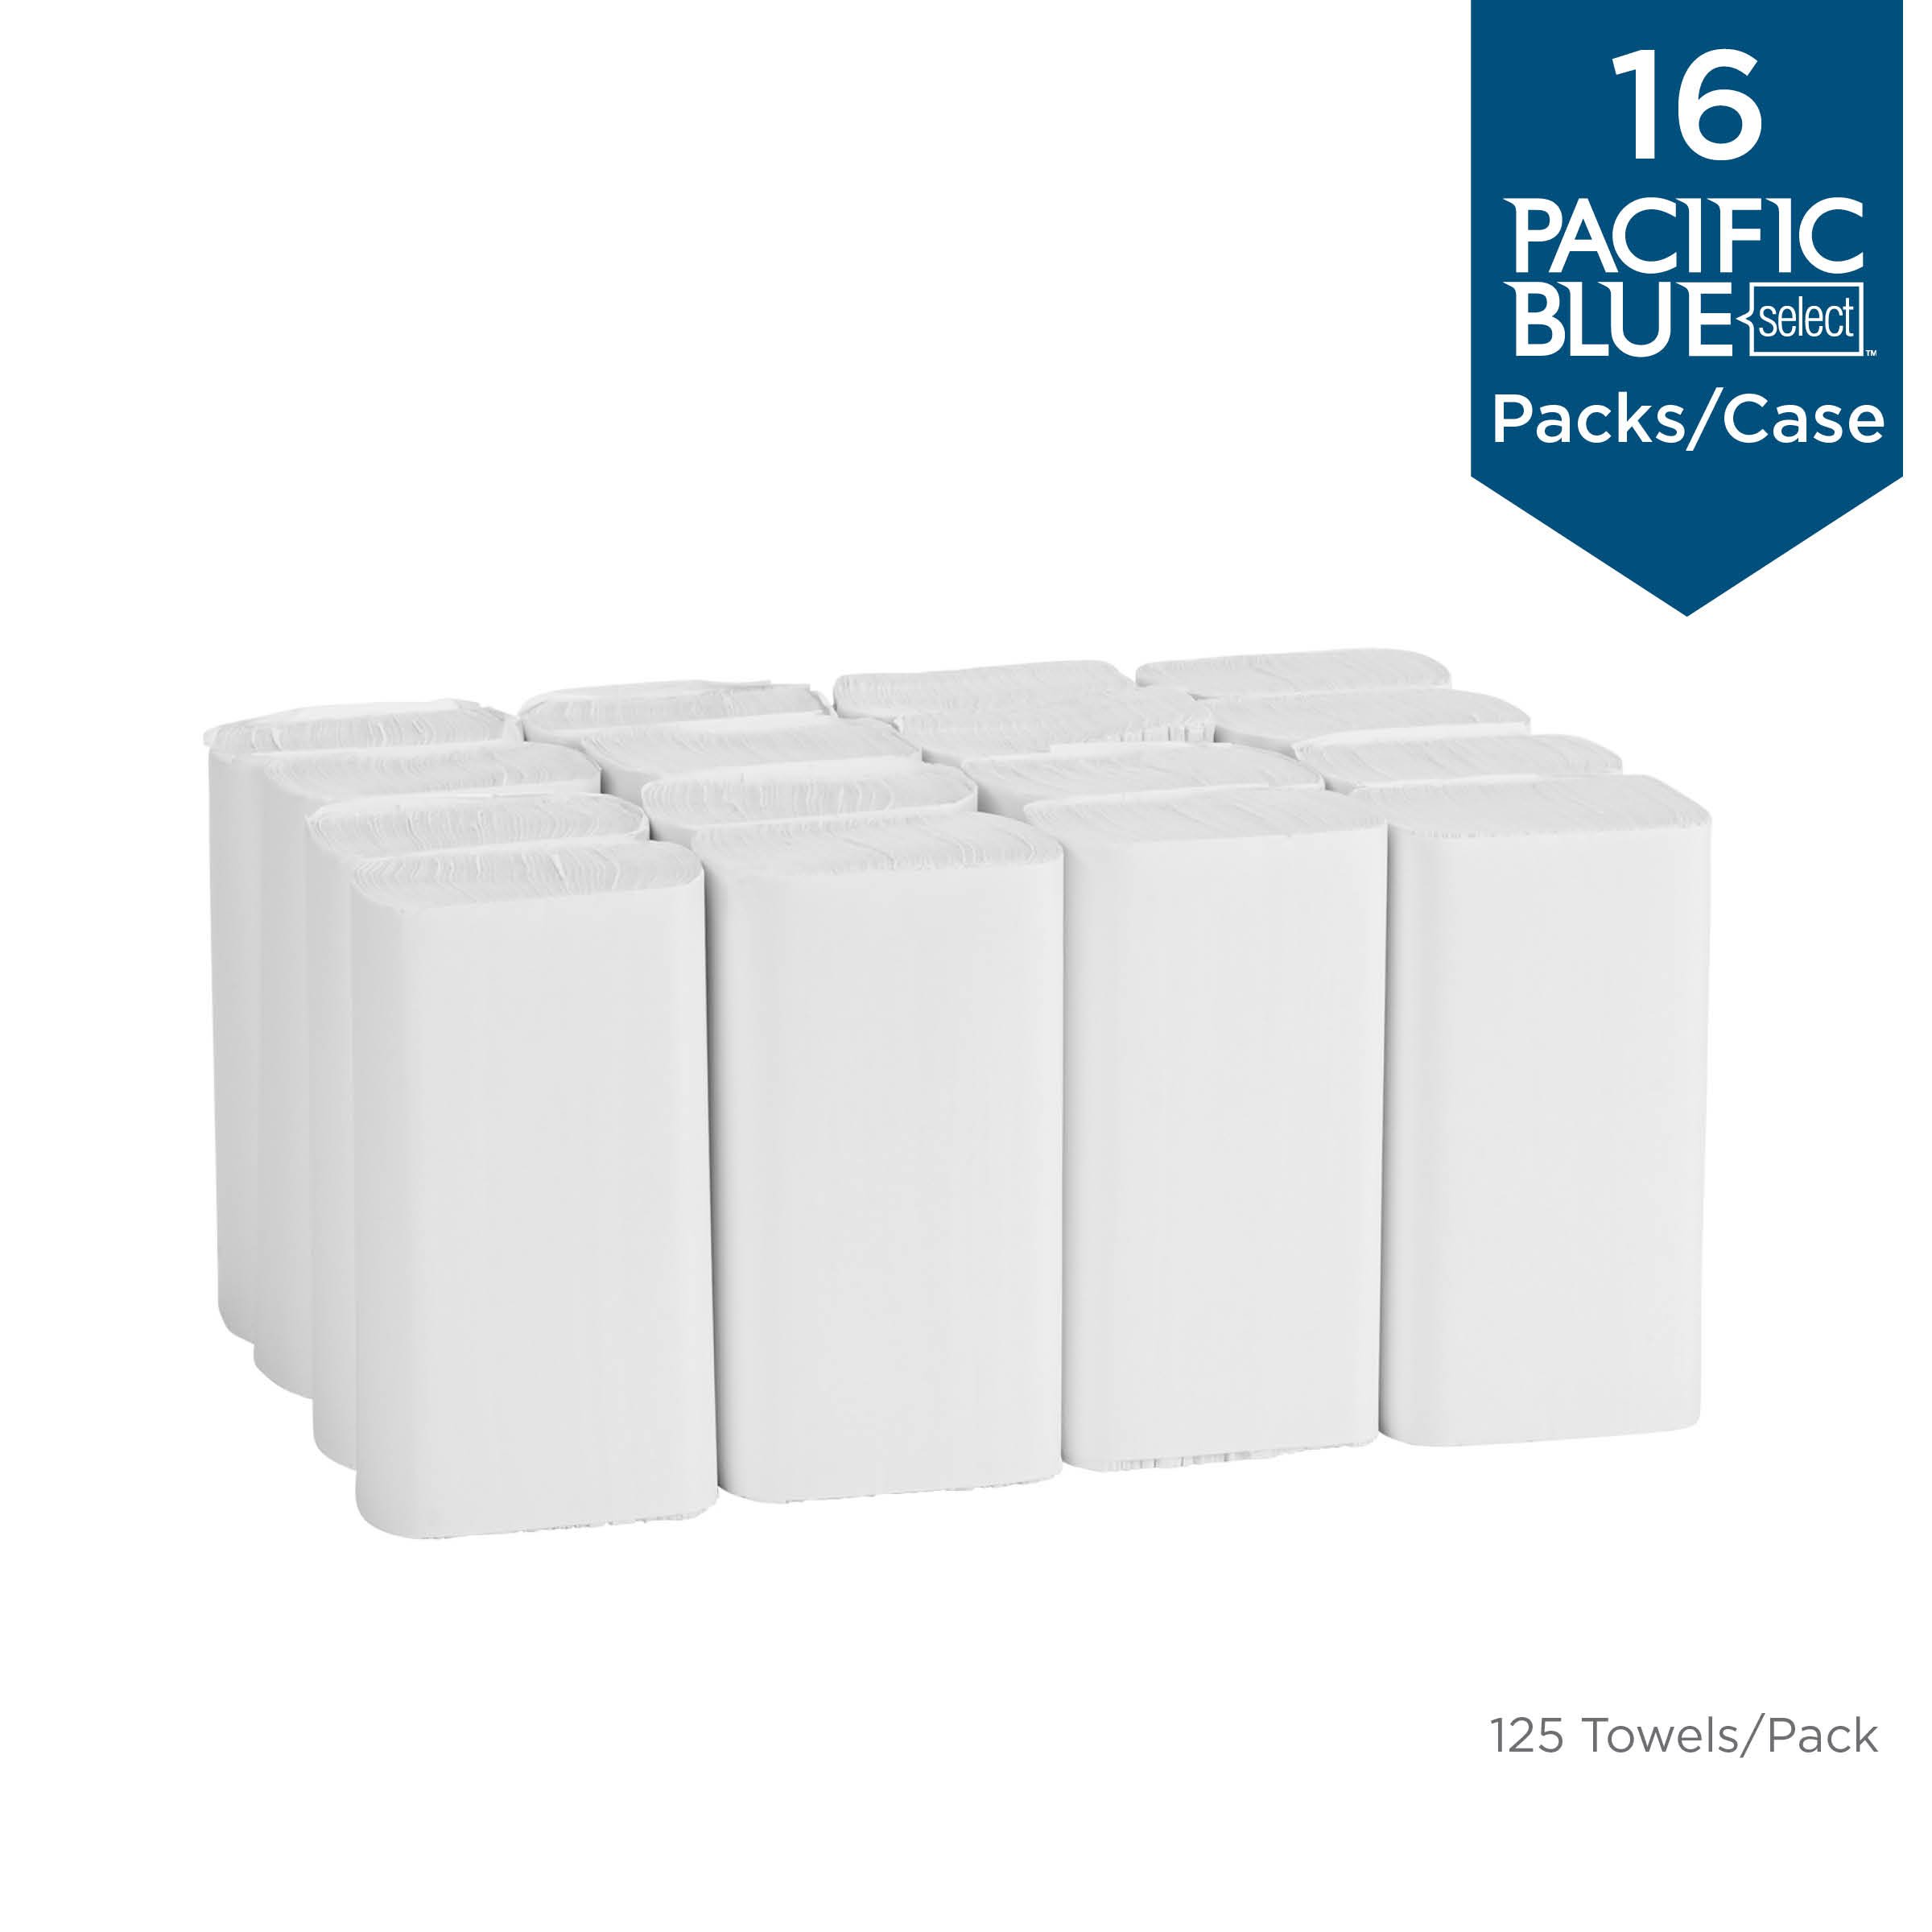 Pacific Blue Select Multifold Premium 2-Ply Paper Towels by GP PRO (Georgia-Pacific); White; 21000; 125 Paper Towels Per Pack; 16 Packs Per Case